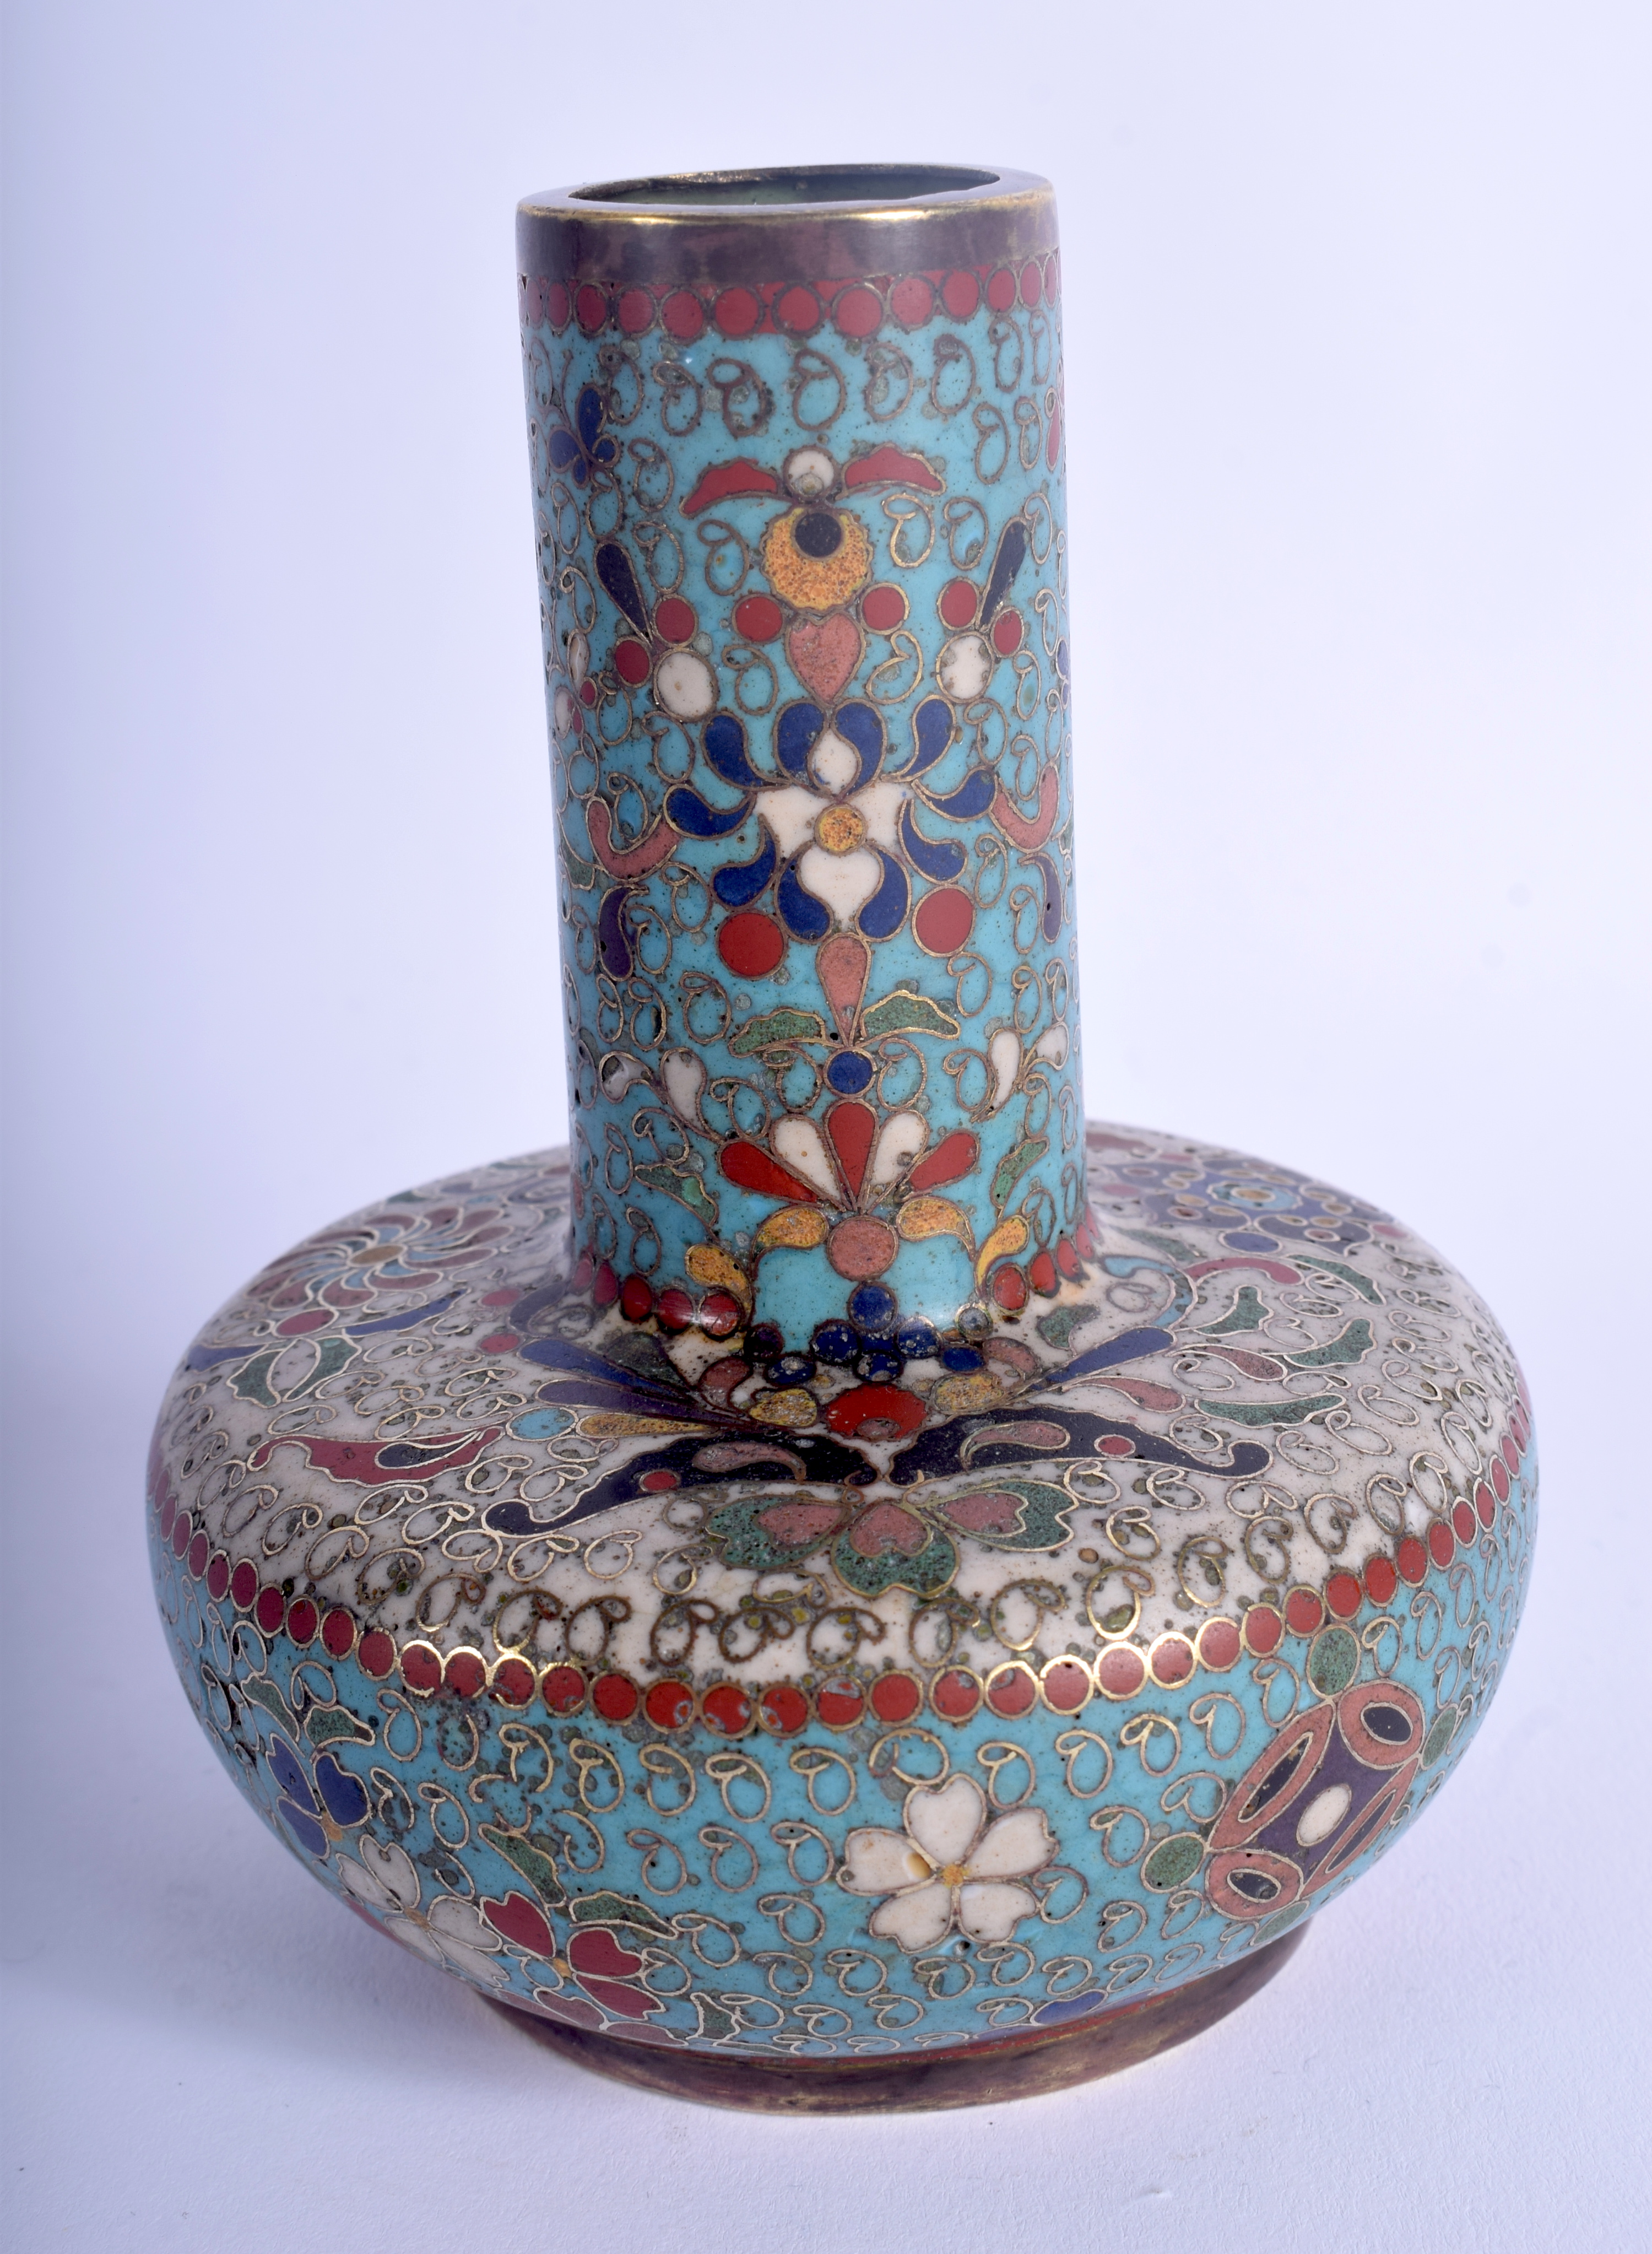 A 19TH CENTURY JAPANESE MEIJI PERIOD CLOISONNE ENAMEL VASE decorated with swirling foliage. 10.5 cm - Image 2 of 3